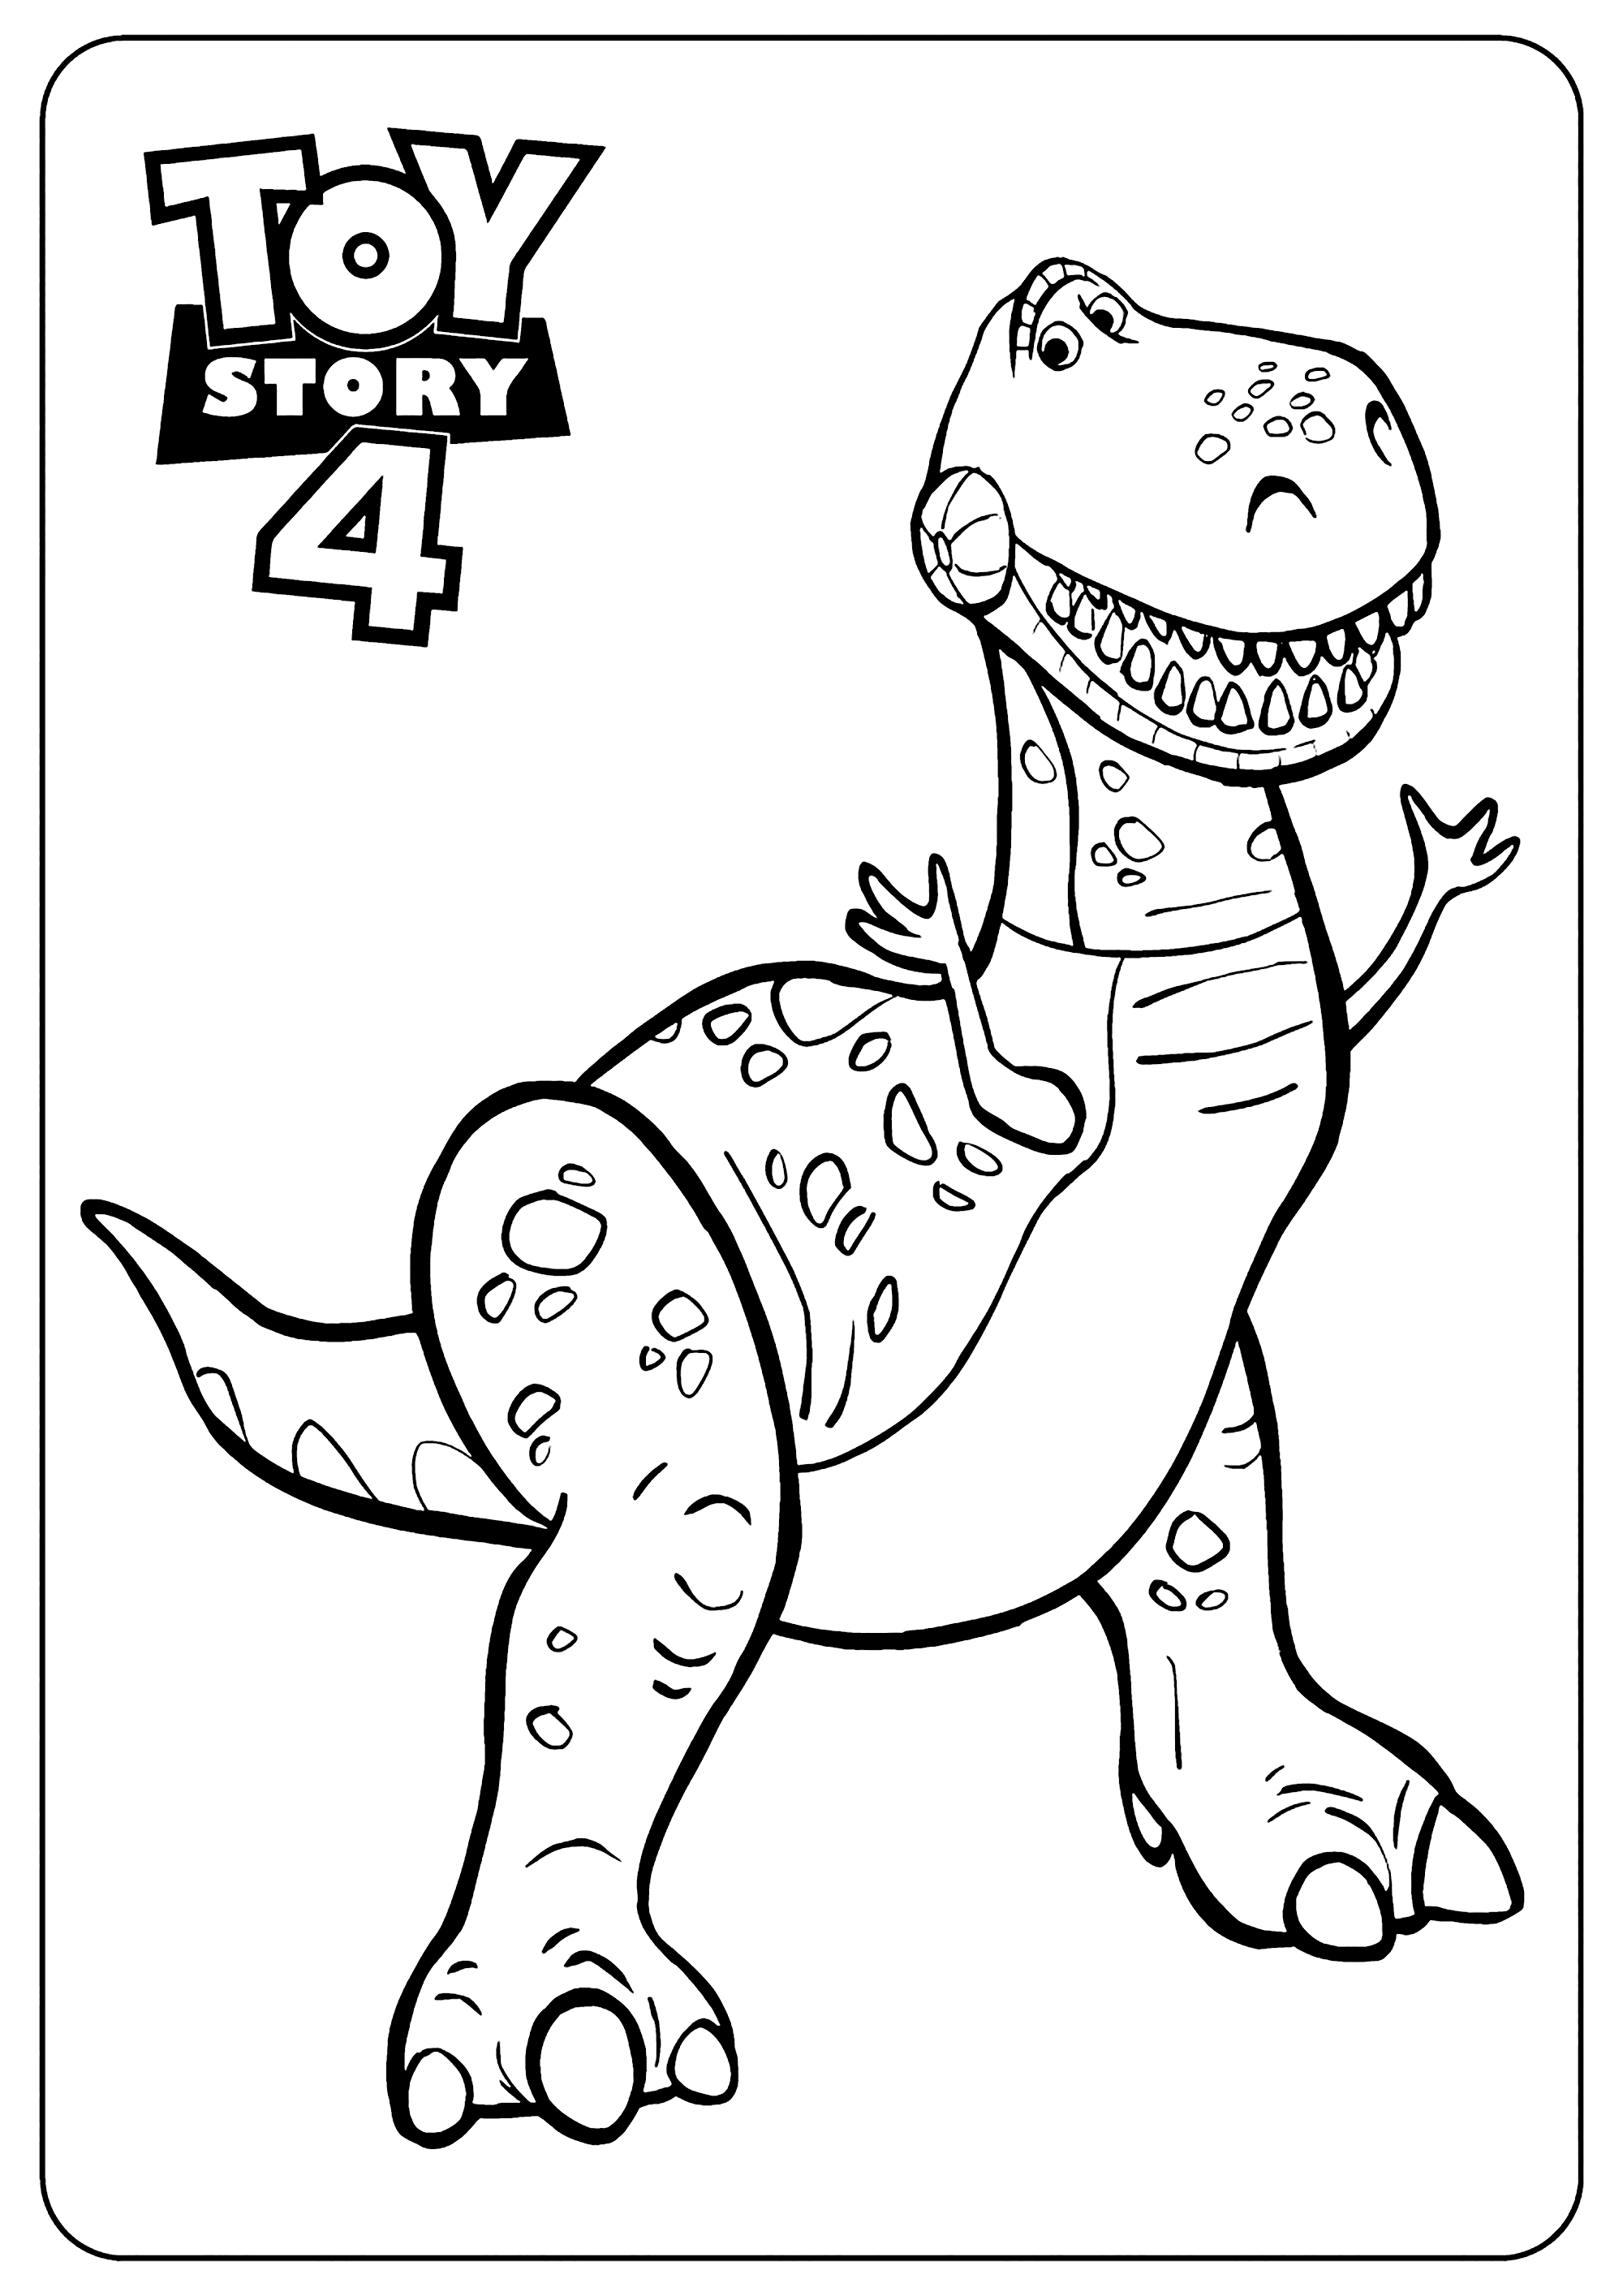 Rex Cool Toy Story 4 Coloring Pages Toy Story 4 Kids